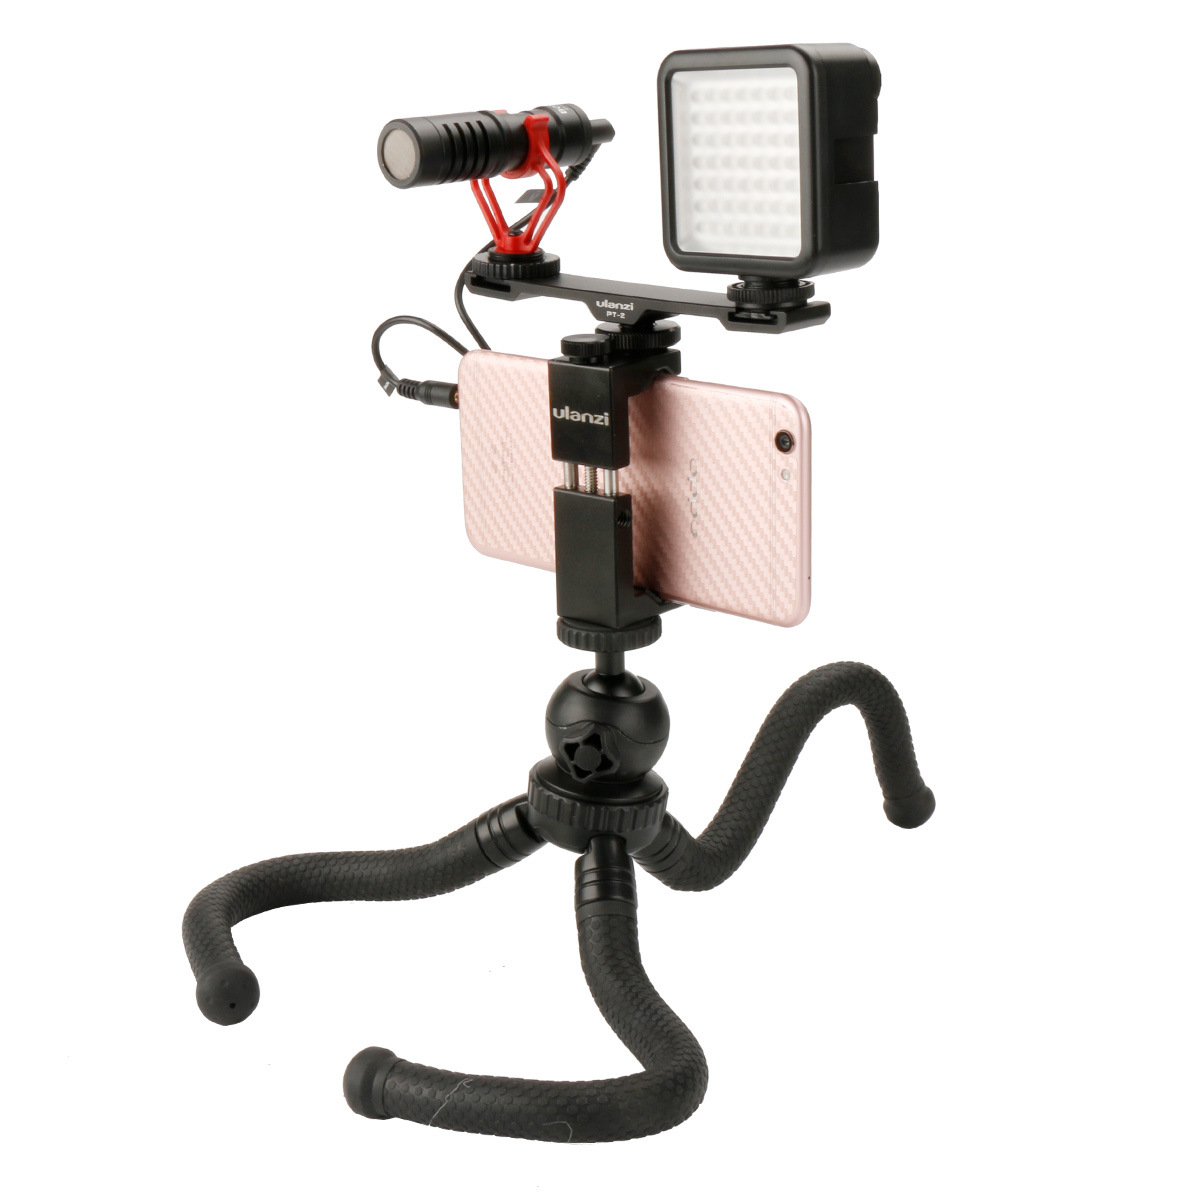 Ulanzi-PT-2-Dual-Cold-Shoe-Flash-Photography-14-Thread-Bracket-Plate-for-Microphone-Flash-Light-1290796